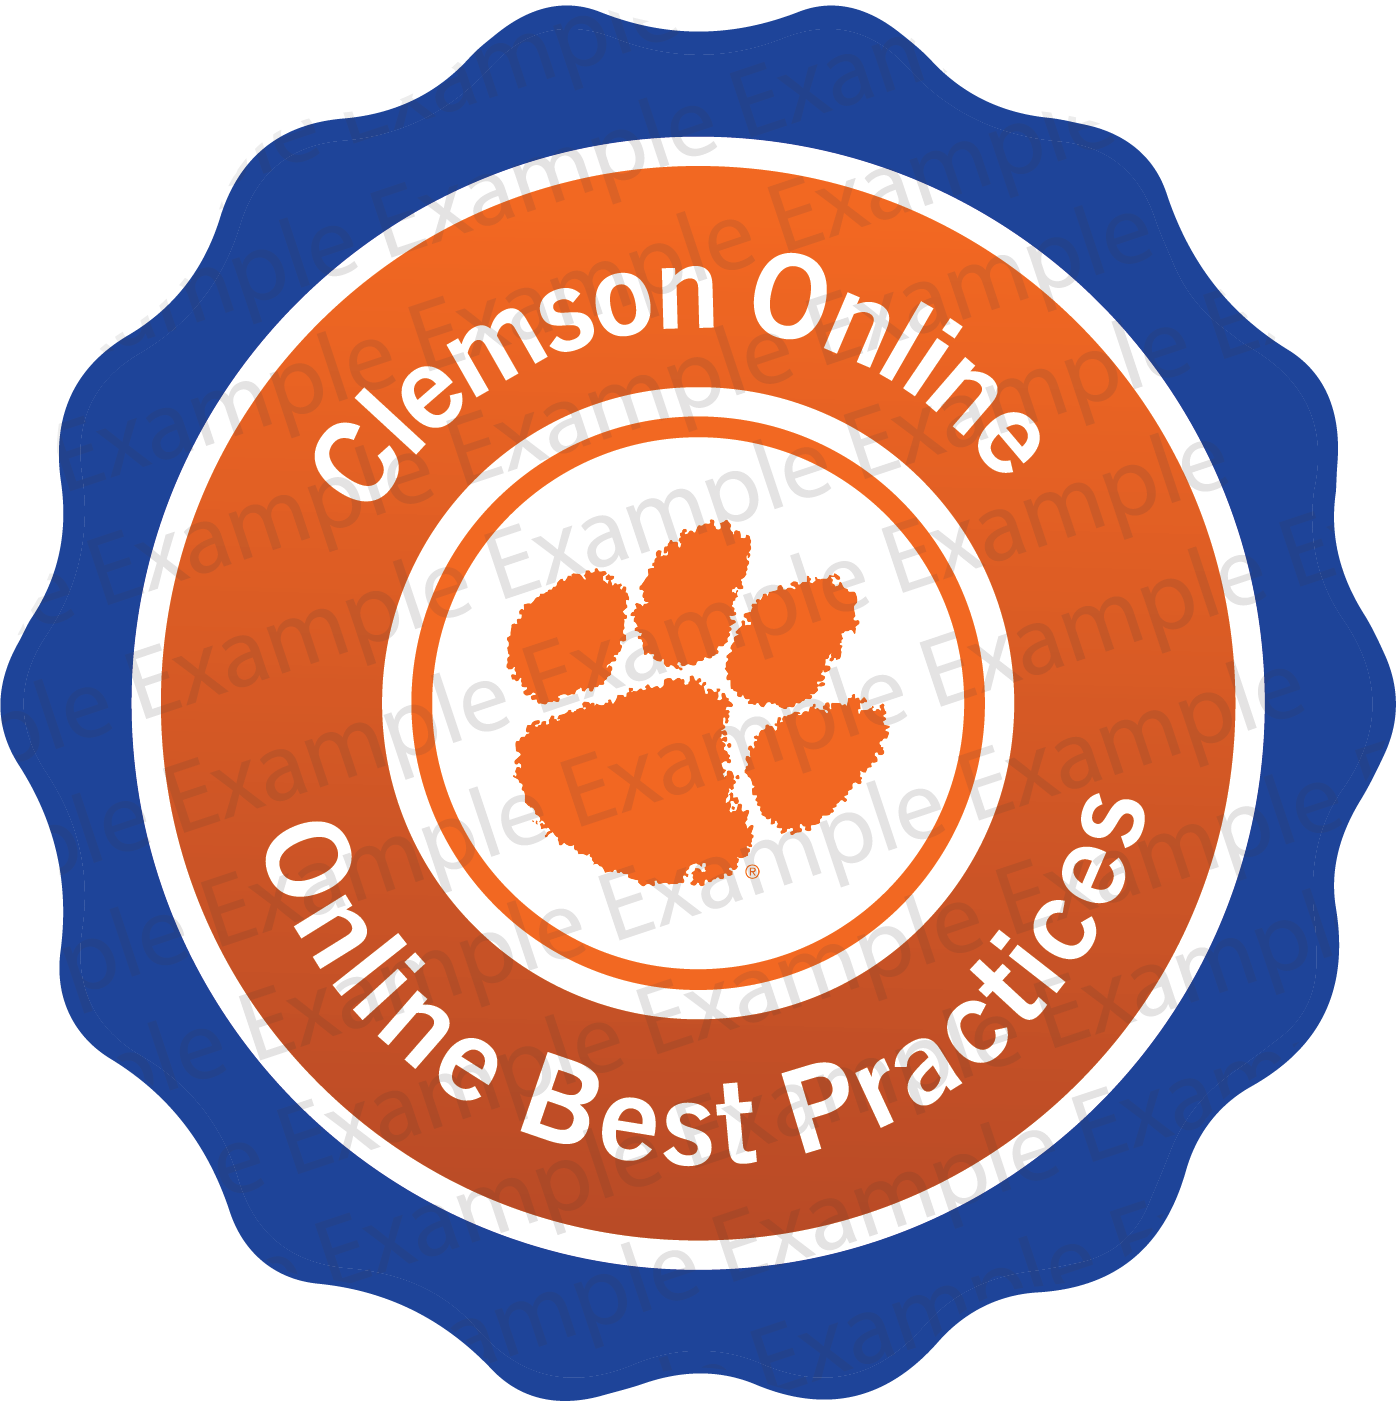 Orange, white, and blue circular badge with text reading "Clemson Online" at the top and "Online Best Practices" at the bottom.